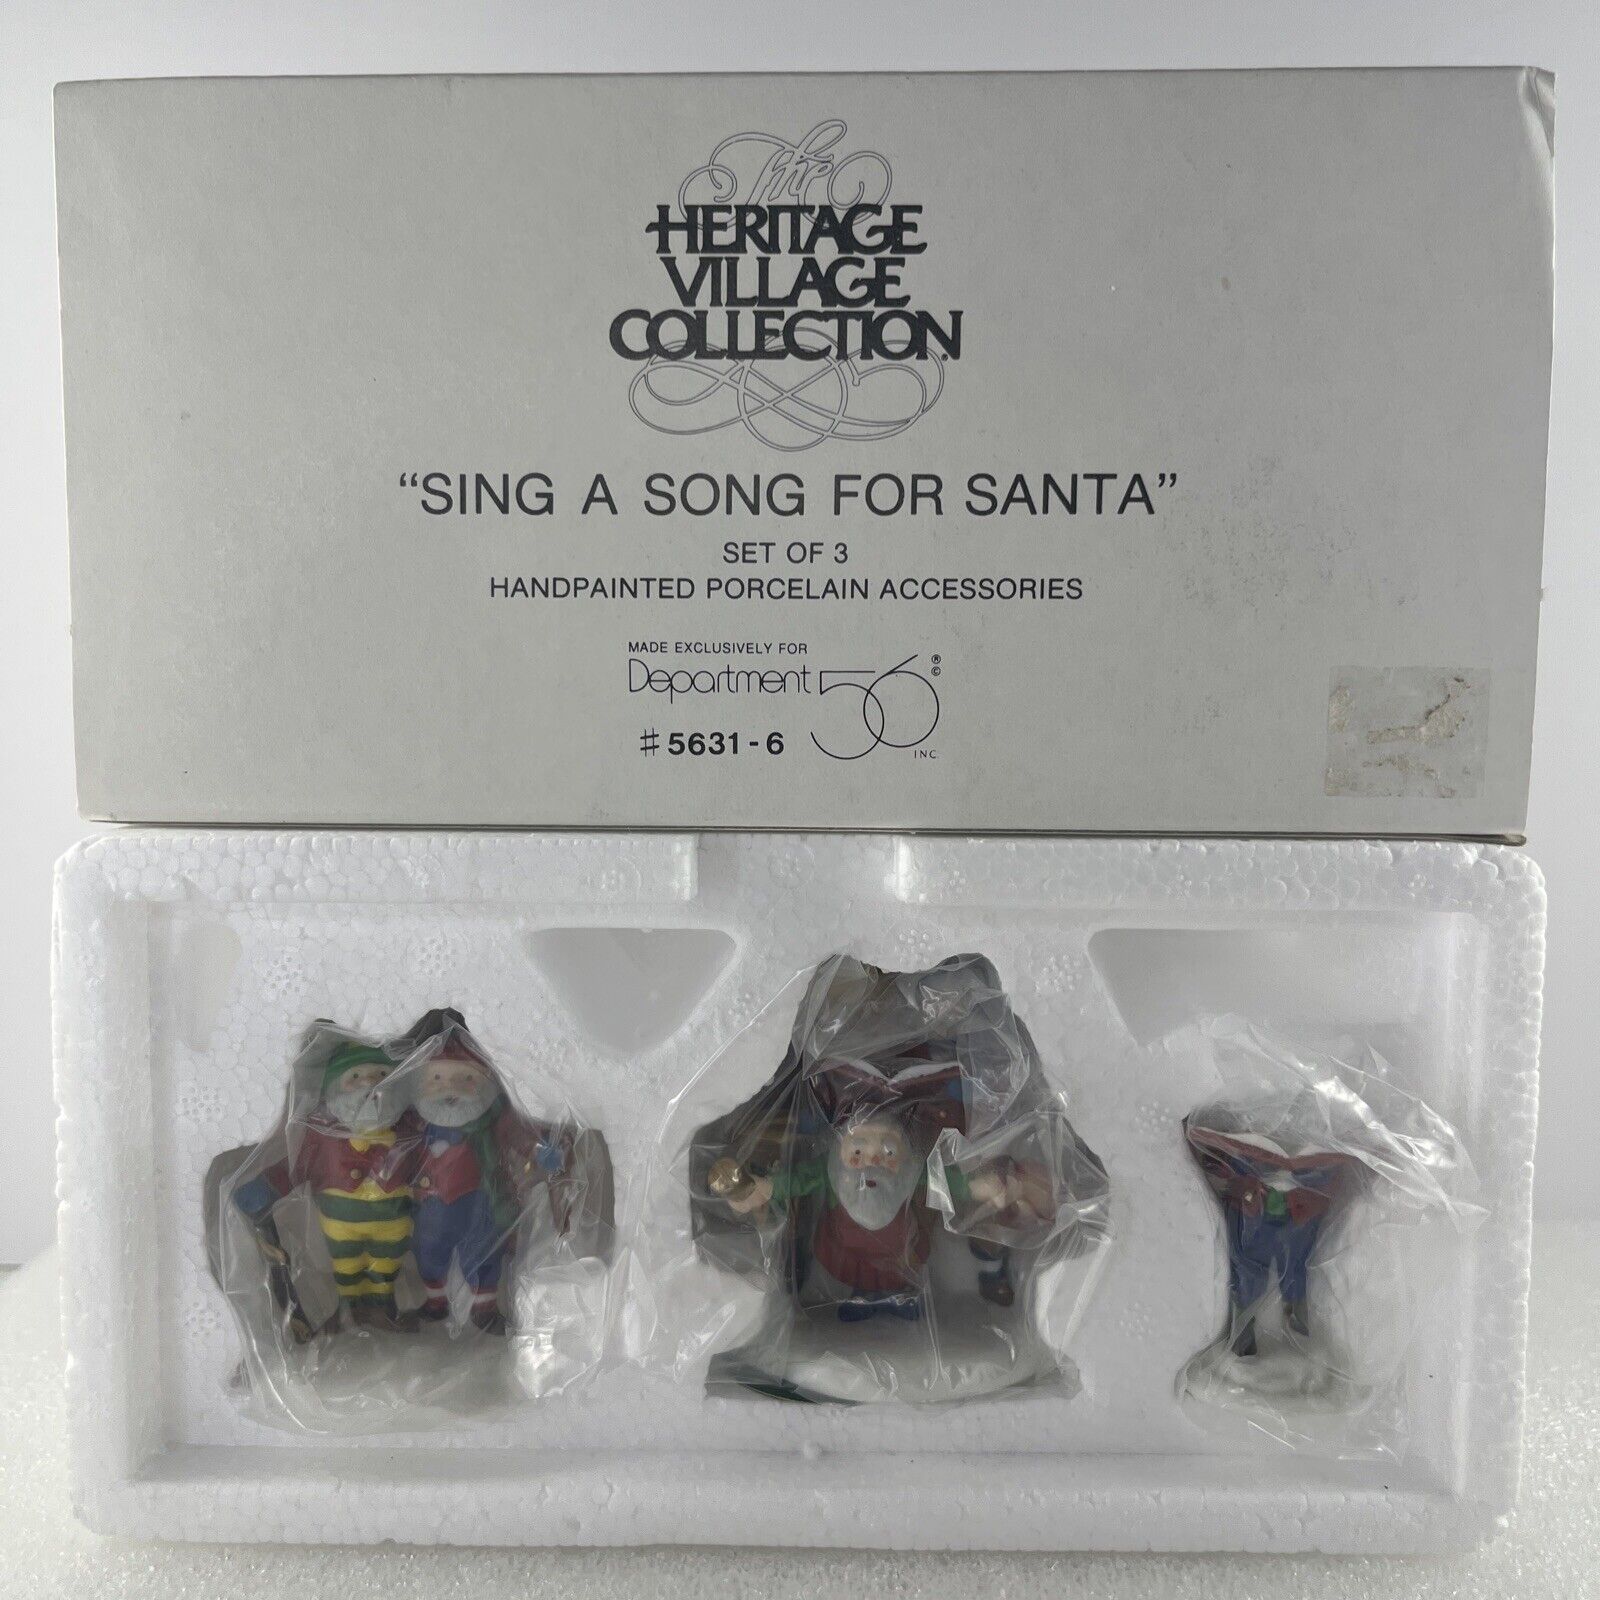 Heritage Village Collection “Sing A Song For Santa” Made For Dept 56 #5631-6